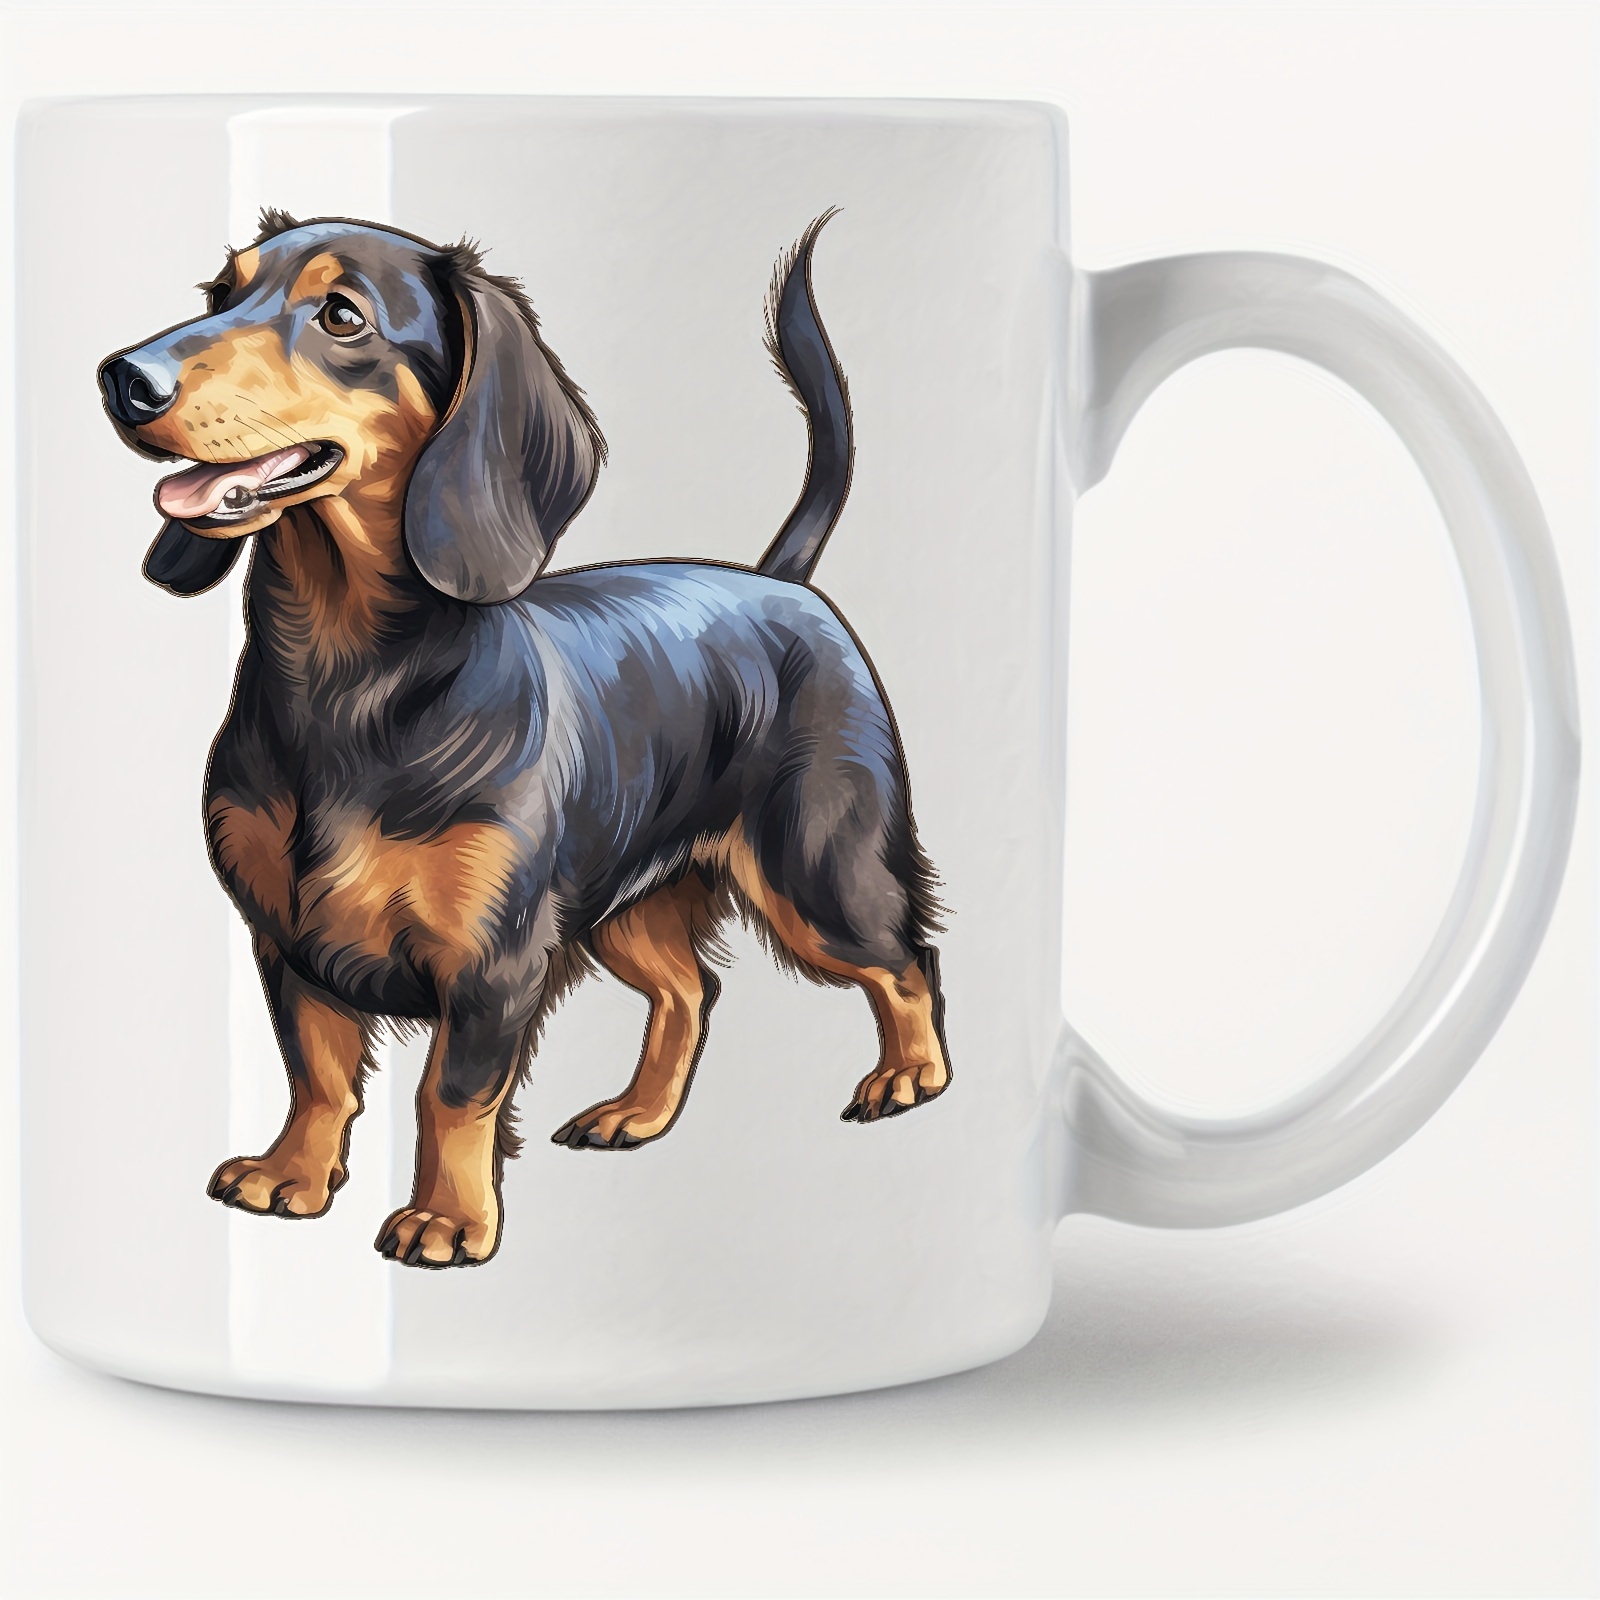 

1pc 11oz/330ml Mug For Cafe, Coffee Mug, 15 Black And Tan Dachshund Watercolor Clipart, Gift For Friends, Sisters, Colleagues, Family, Coffee Drinker, Owner, Ceramic Cup, Holiday Gift, For Office